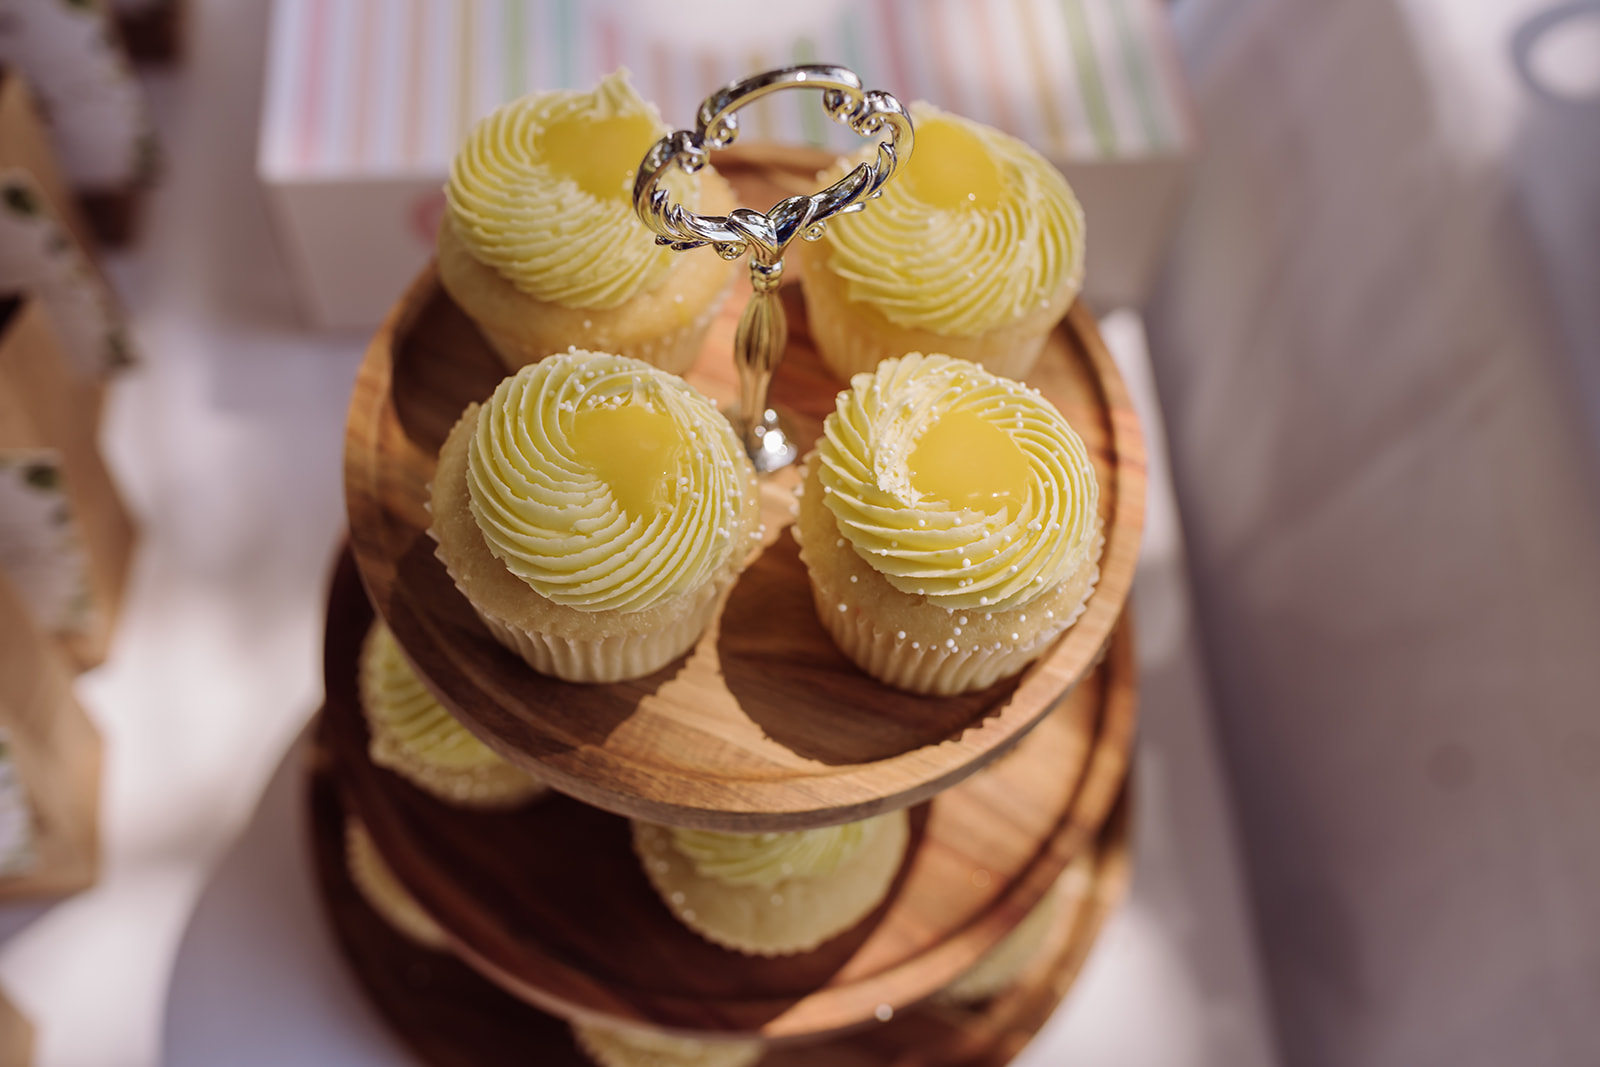 The picture shows one of the delicious lemon cupcake wedding desserts that is placed on the table for guests at a same sex gay wedding and elopement day. Such a creative and beautiful dessert idea that is presented so well on multi-tiered wooden cupcake stand. This was photographed by an inclusive and intimate wedding and elopement photographer, Xilo Photography, Kati Douglas who is based in Oakland, California in the bay area. 